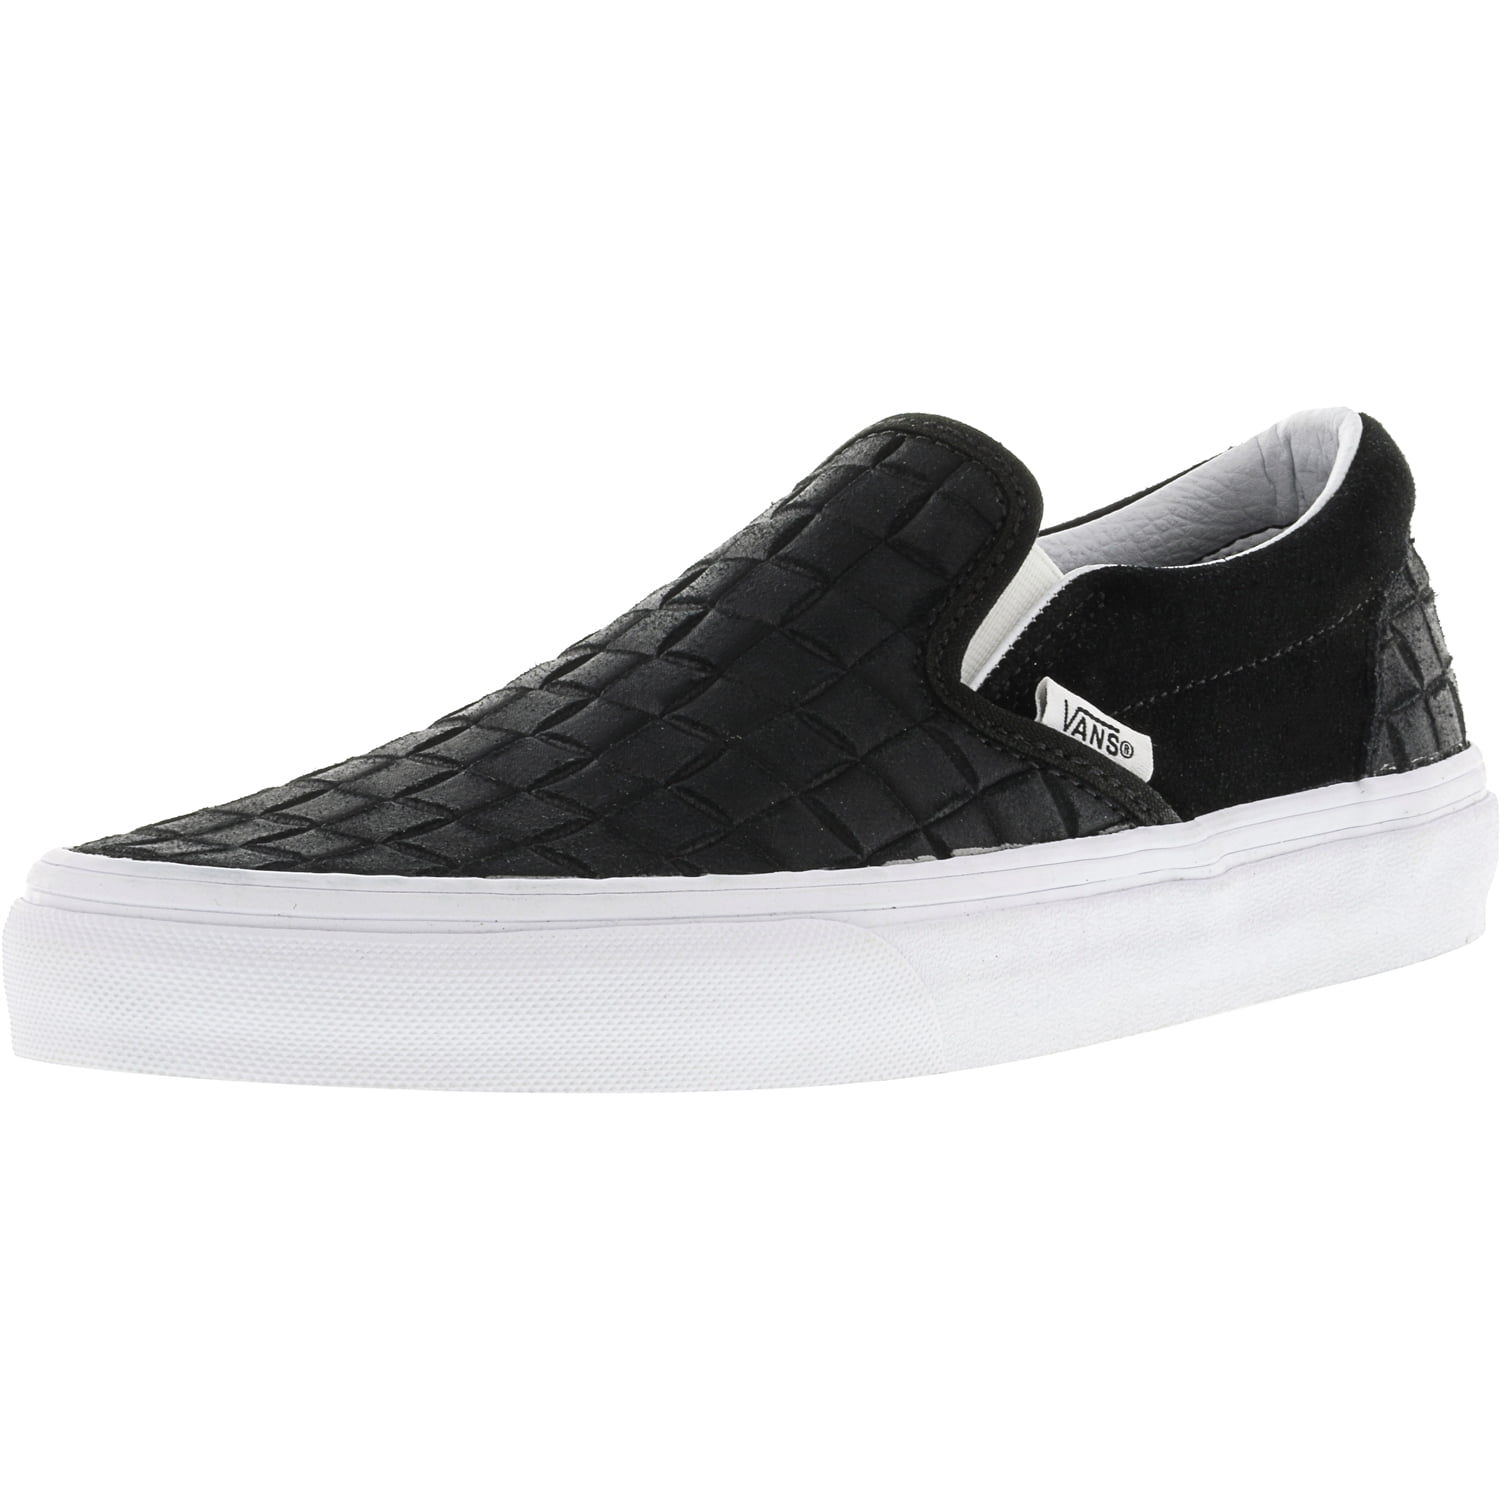 Vans Classic Slip-On Suede Checkers Black Ankle-High Skateboarding Shoe ...